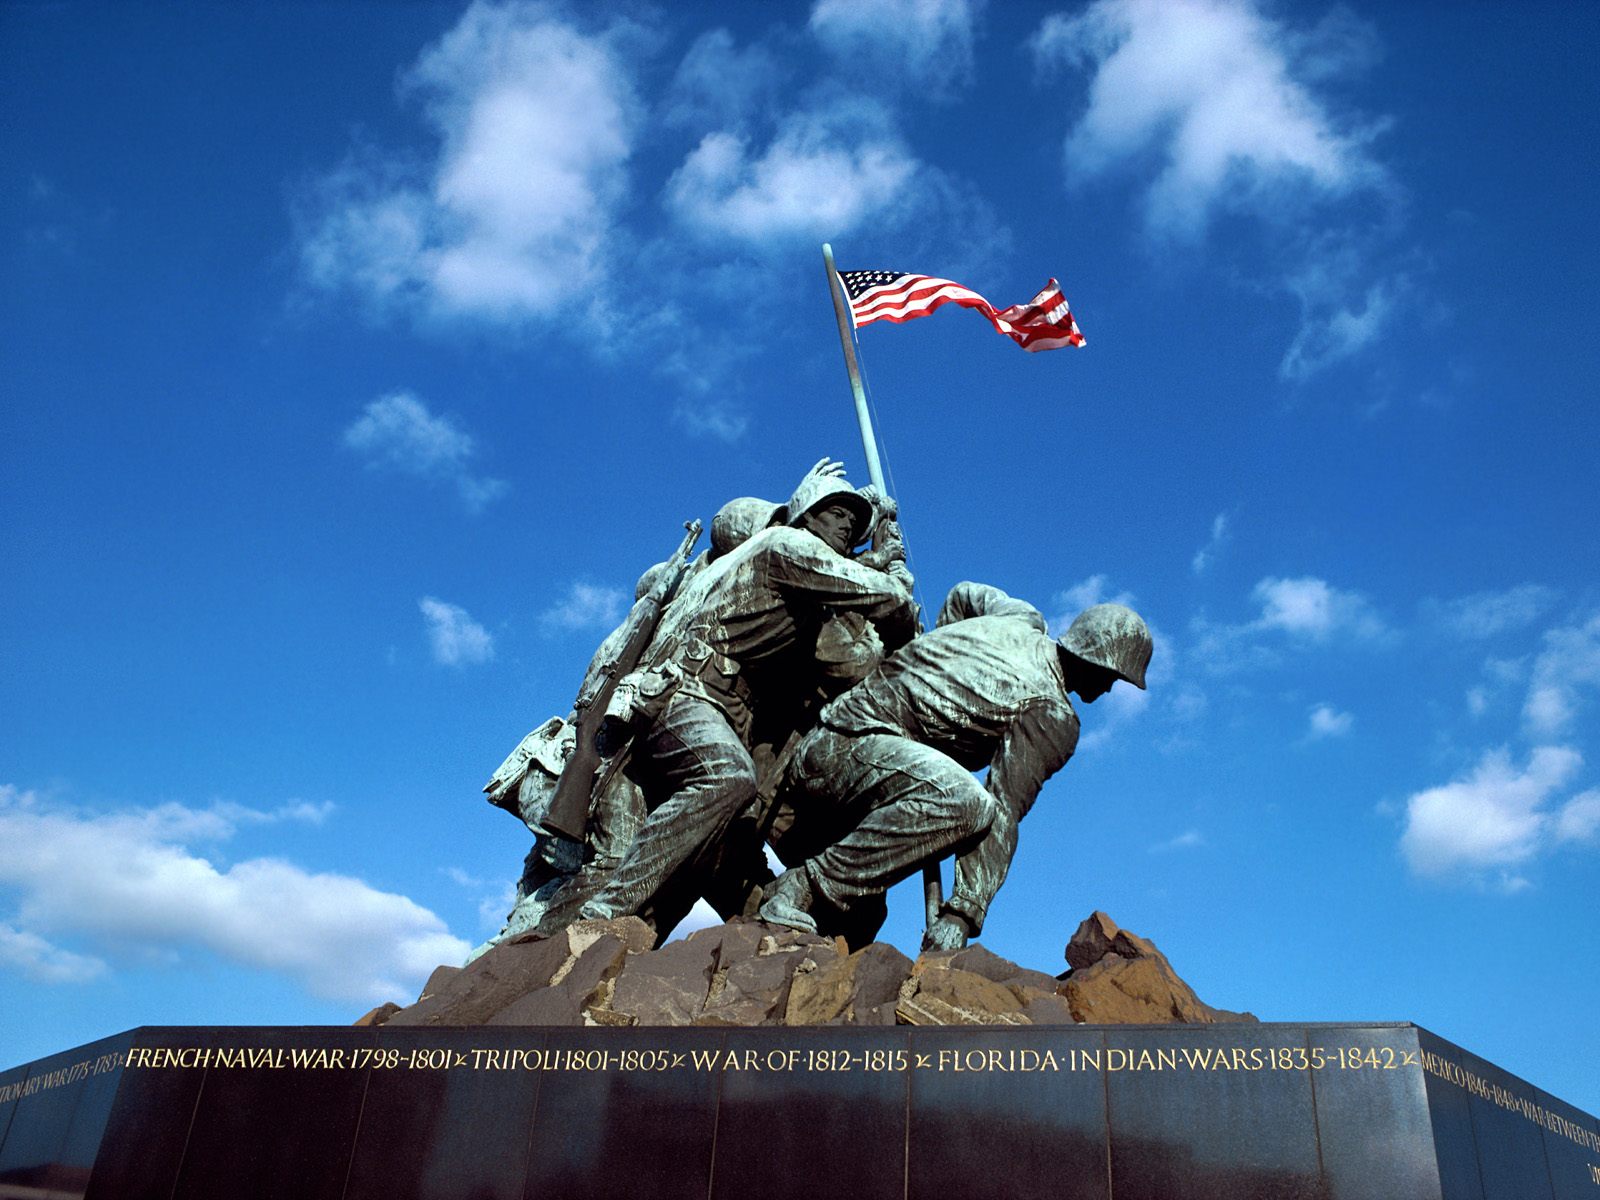 Memorial Day Powerpoint Background